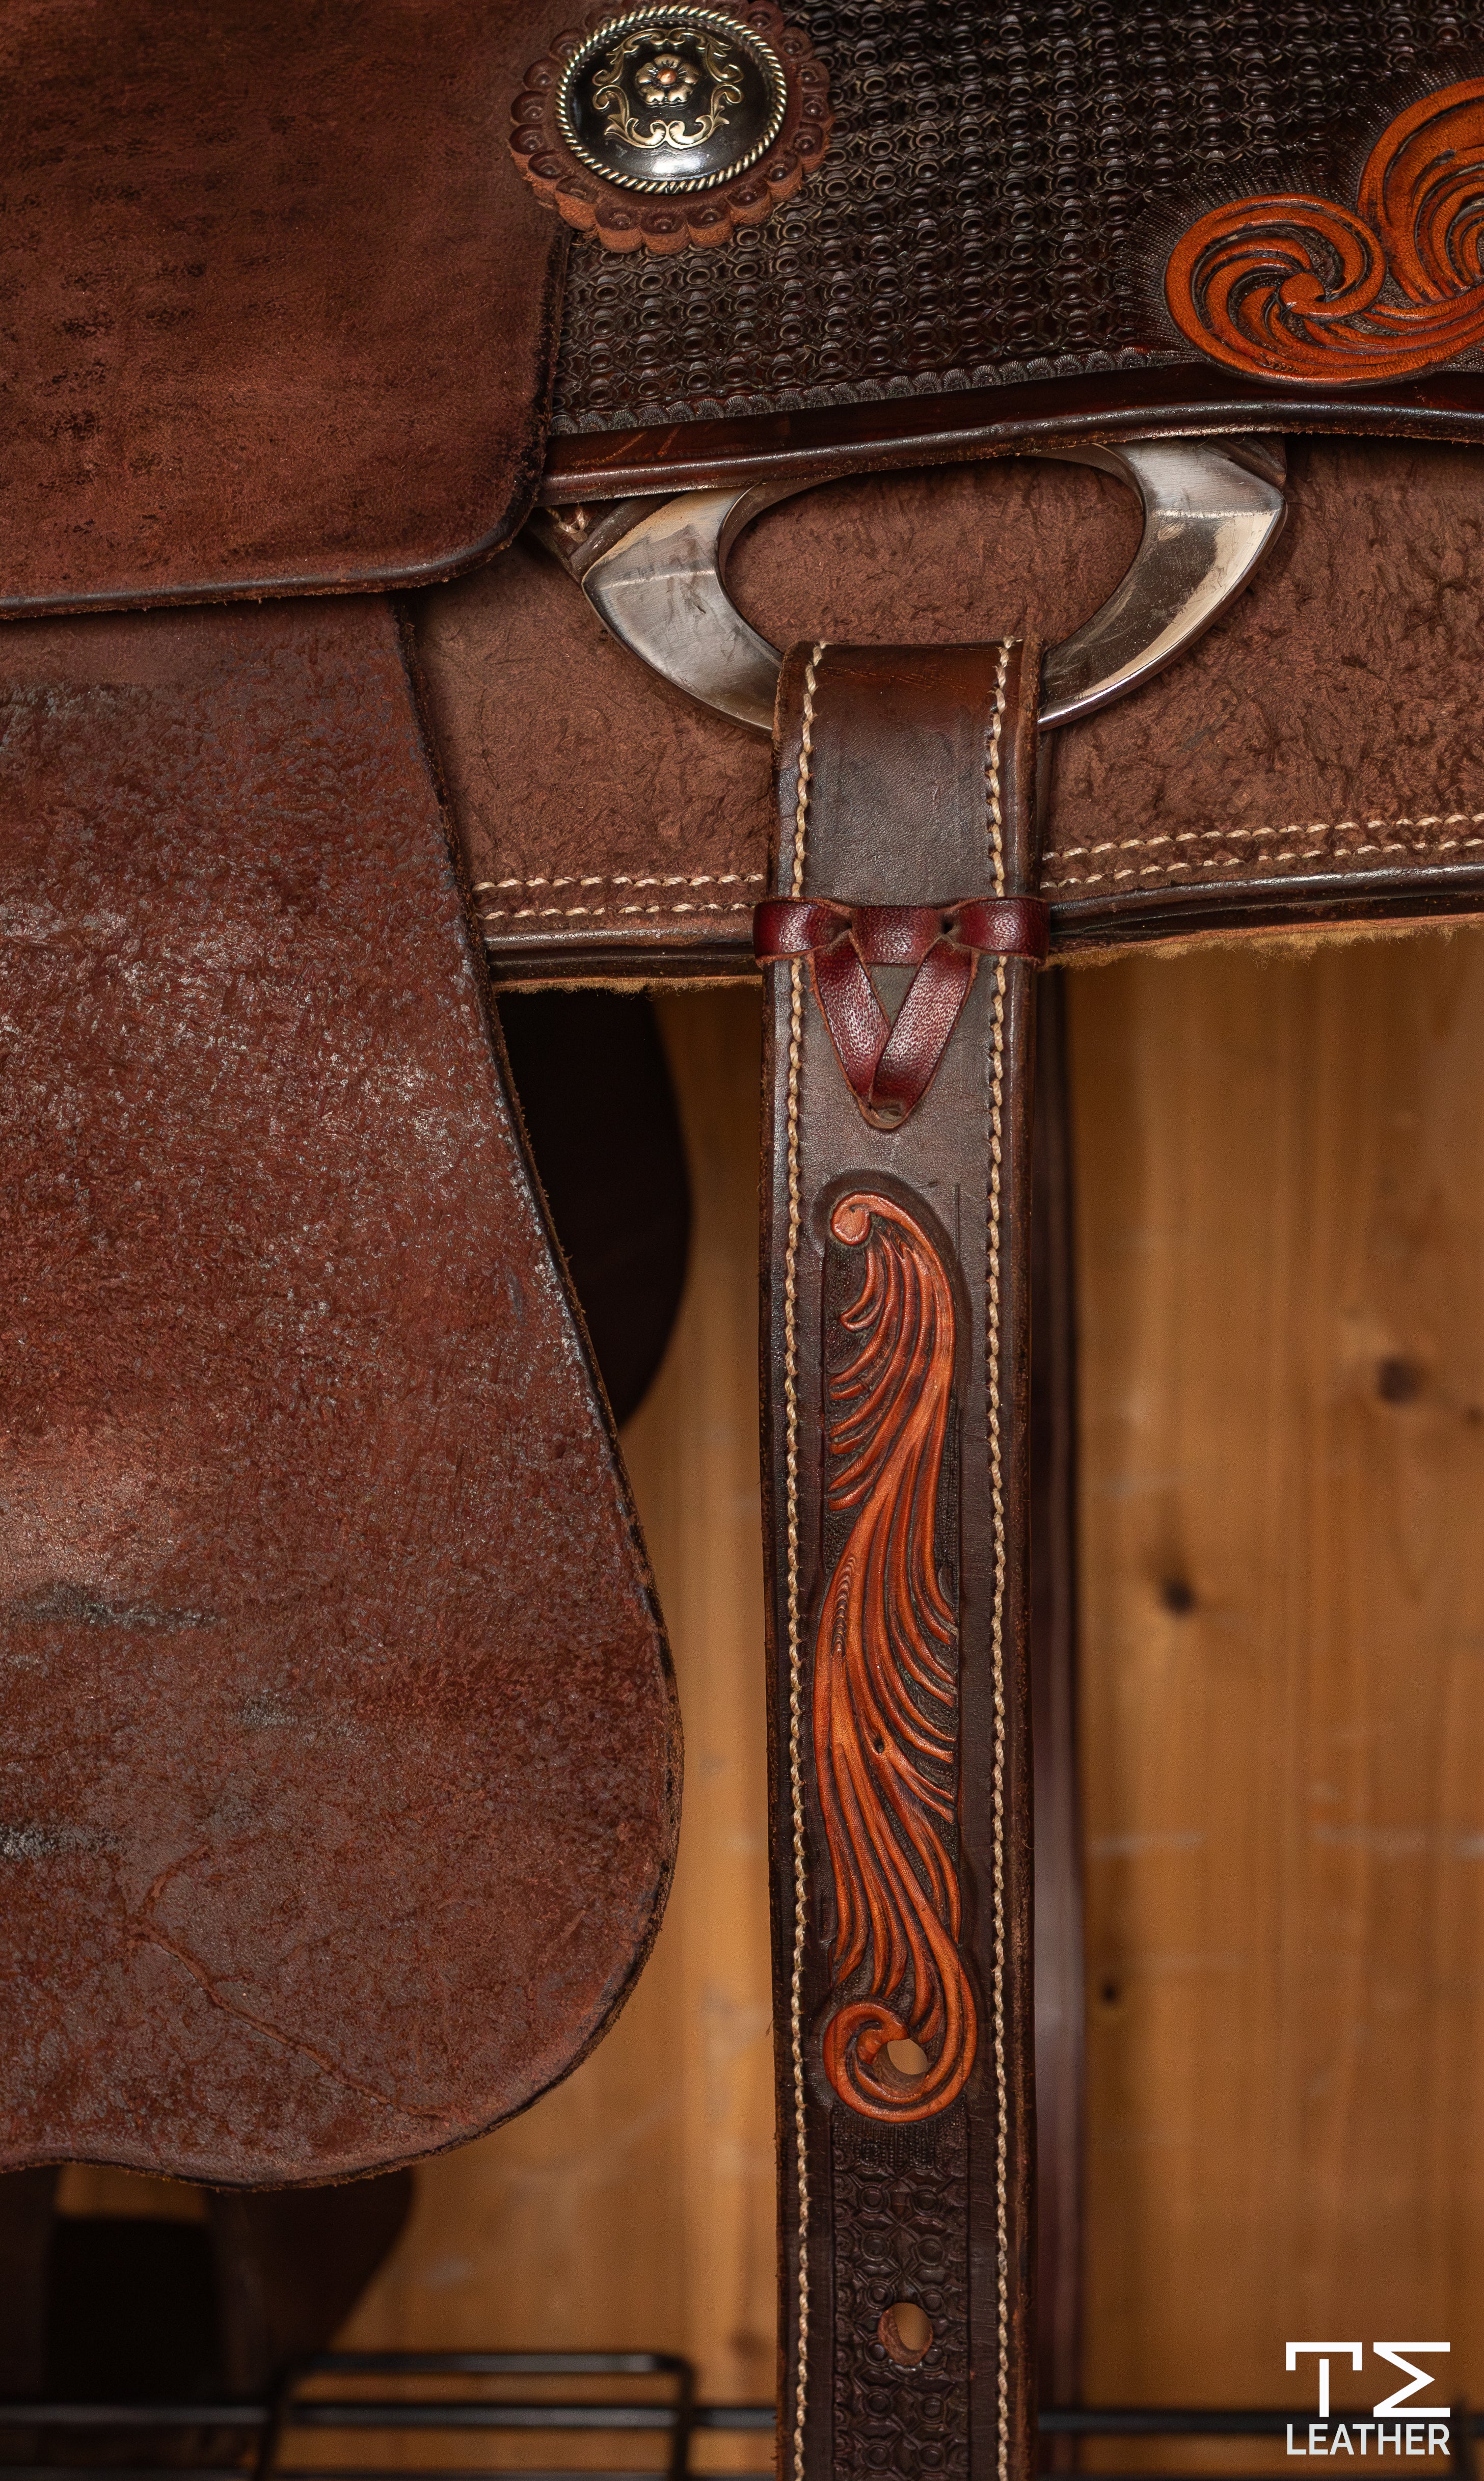 Team Roper Saddle 13.5" Chocolate Roughout 1/2 Floral & Waffle Carved Two-Toned